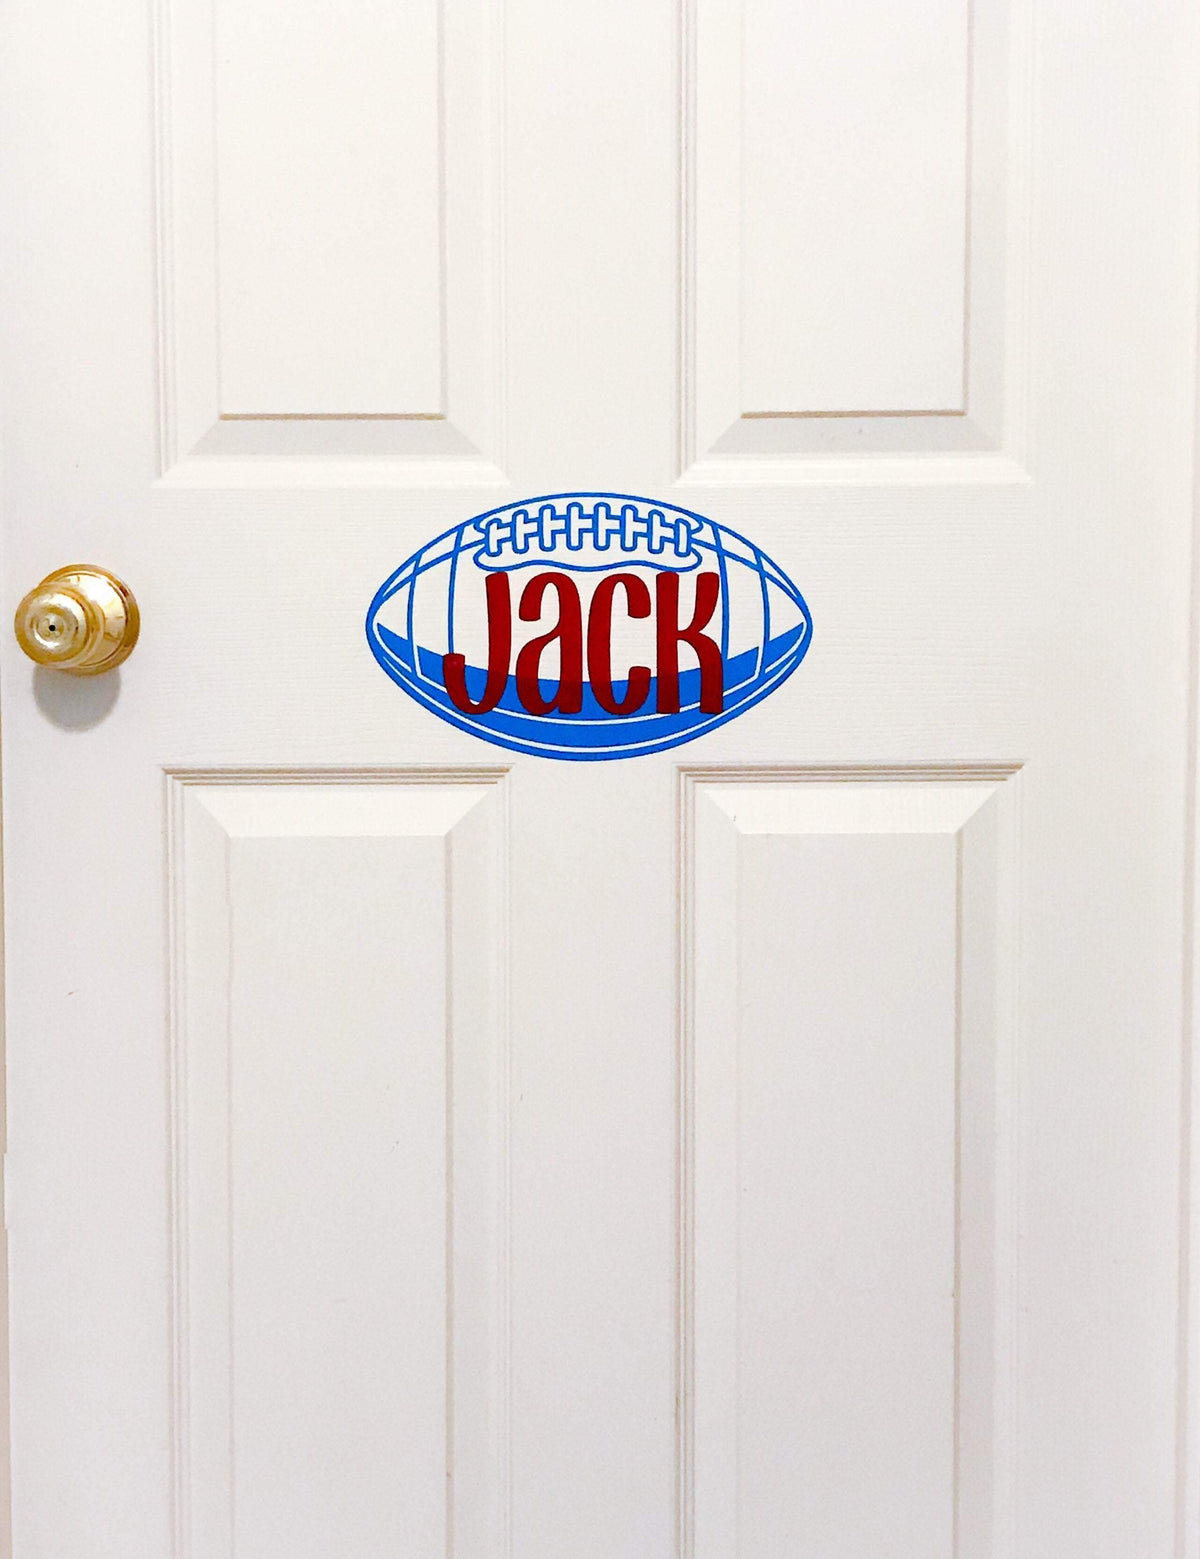 Door Decal | Personalized Vinyl Decal | Monogram Vinyl Decal | Football Decal - This &amp; That Solutions - Door Decal | Personalized Vinyl Decal | Monogram Vinyl Decal | Football Decal - Personalized Gifts &amp; Custom Home Decor